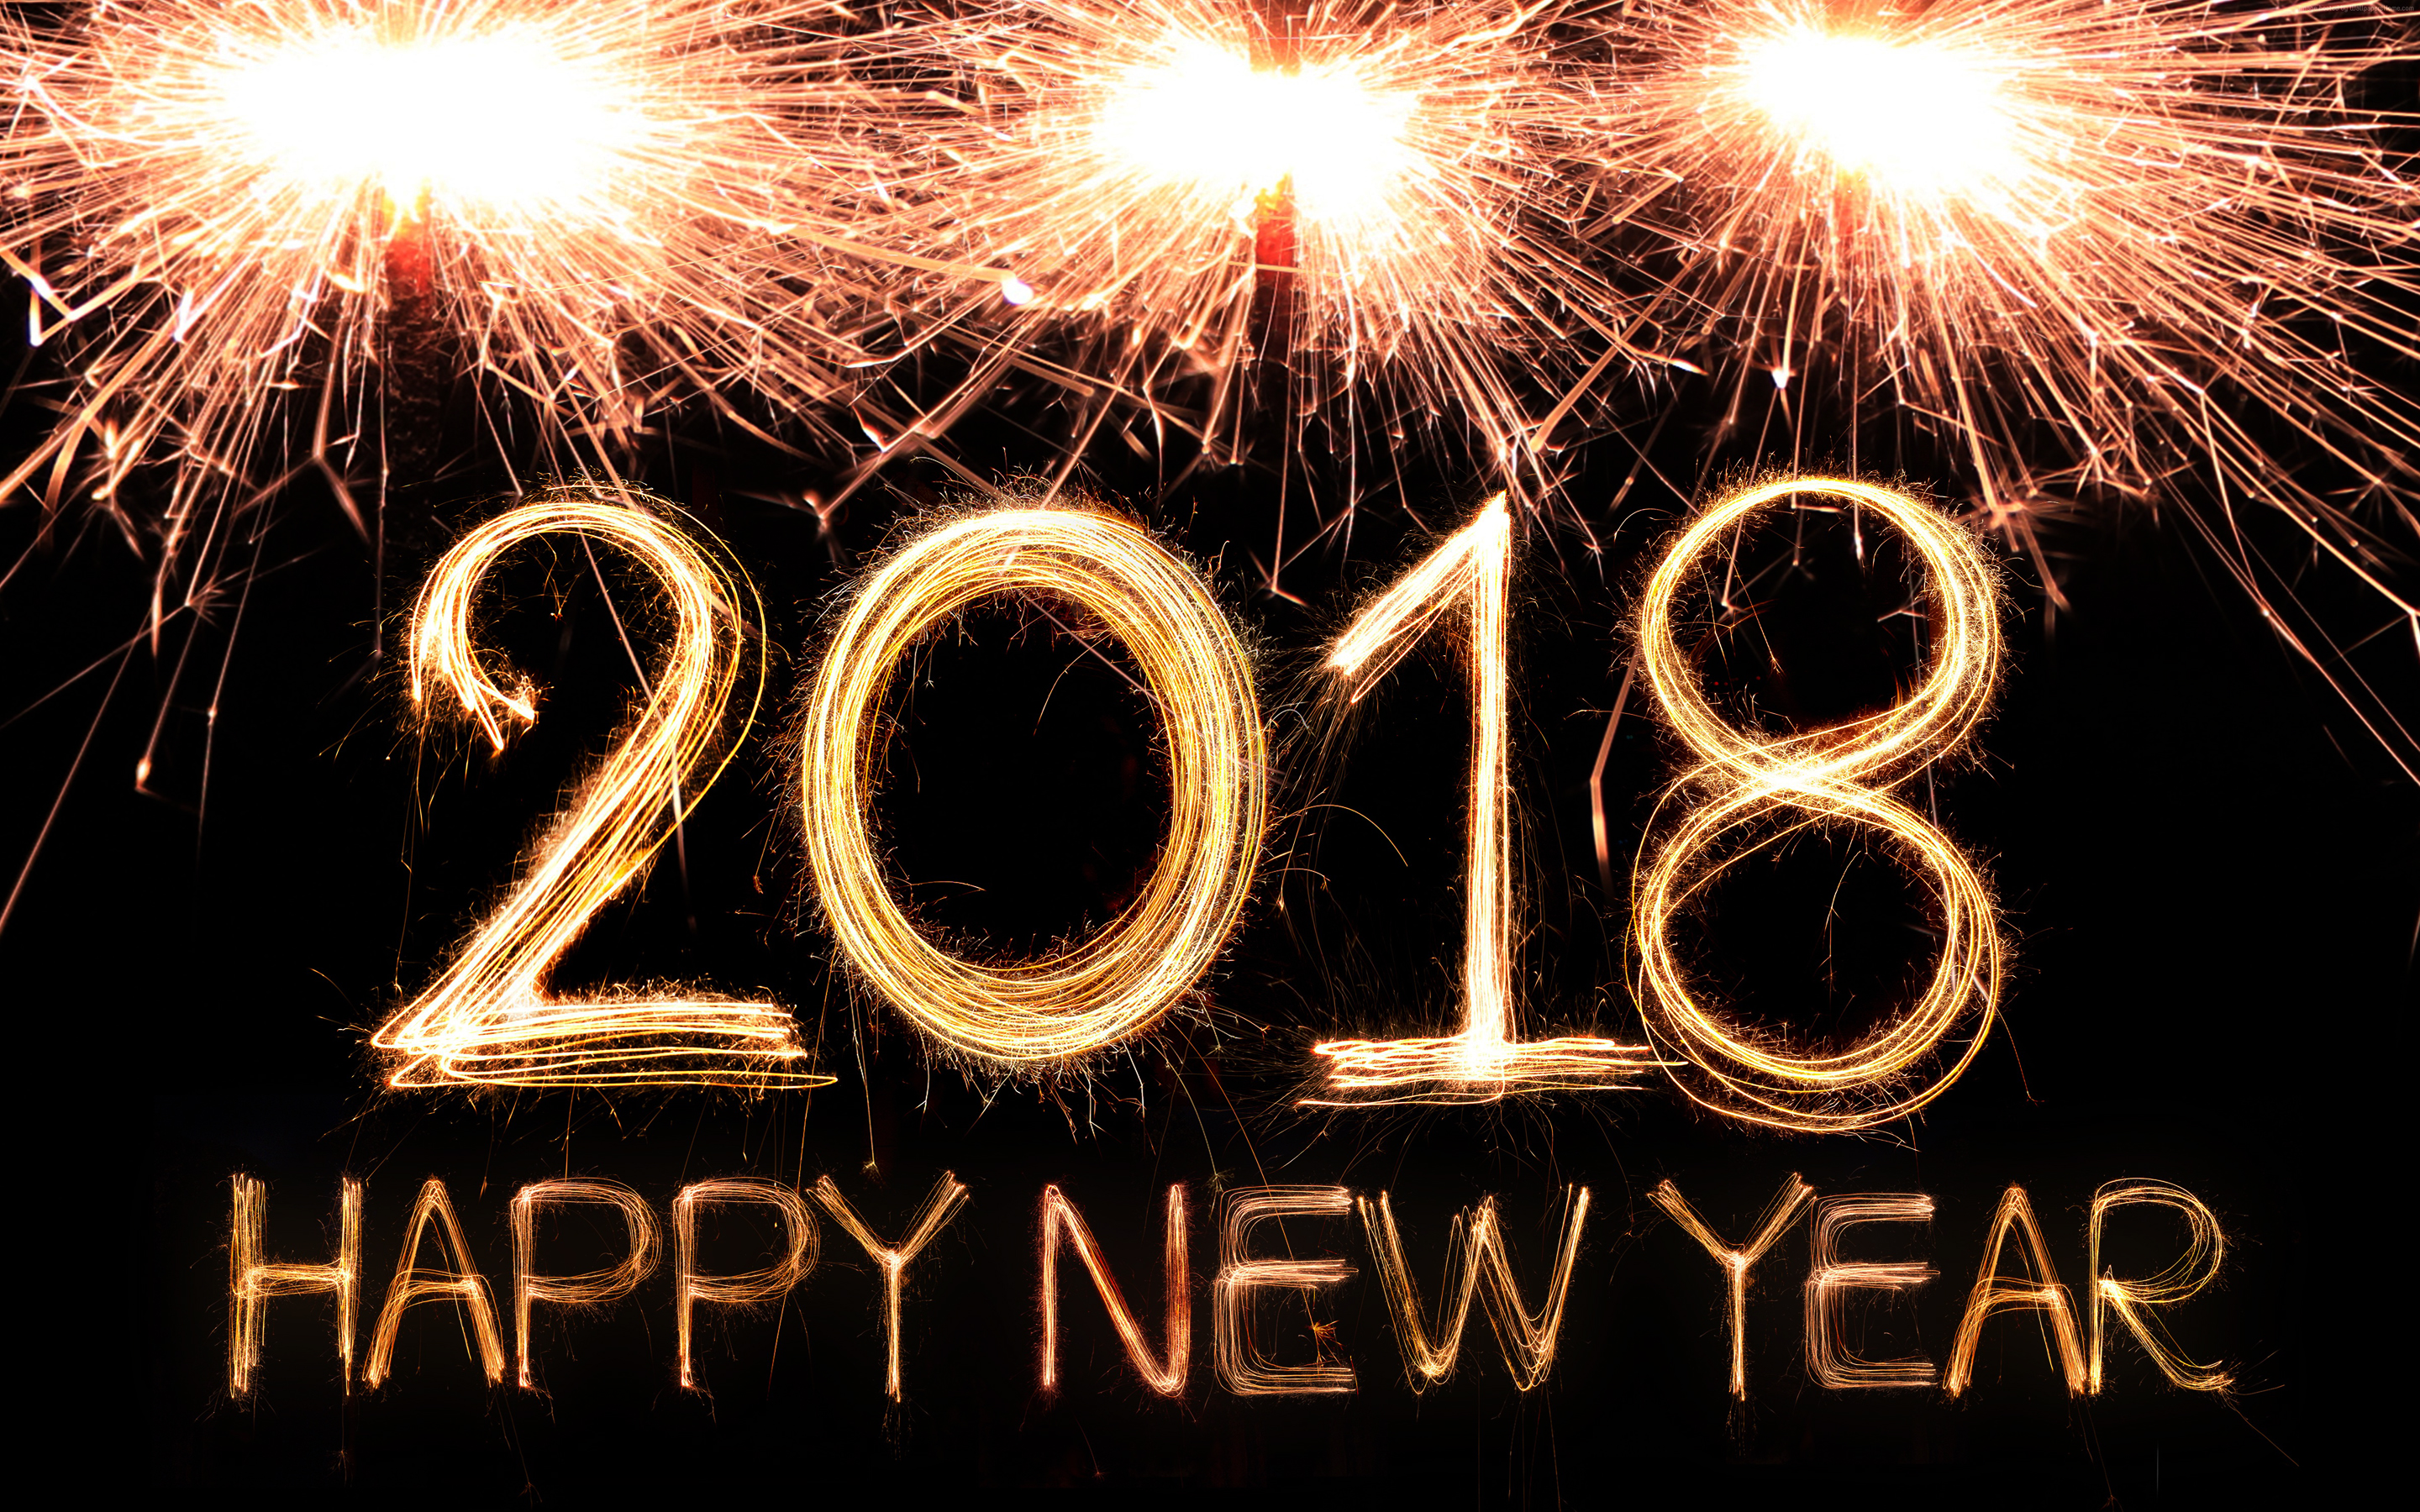 happy new year 2018 wallpapers,sparkler,new years day,text,fireworks,holiday